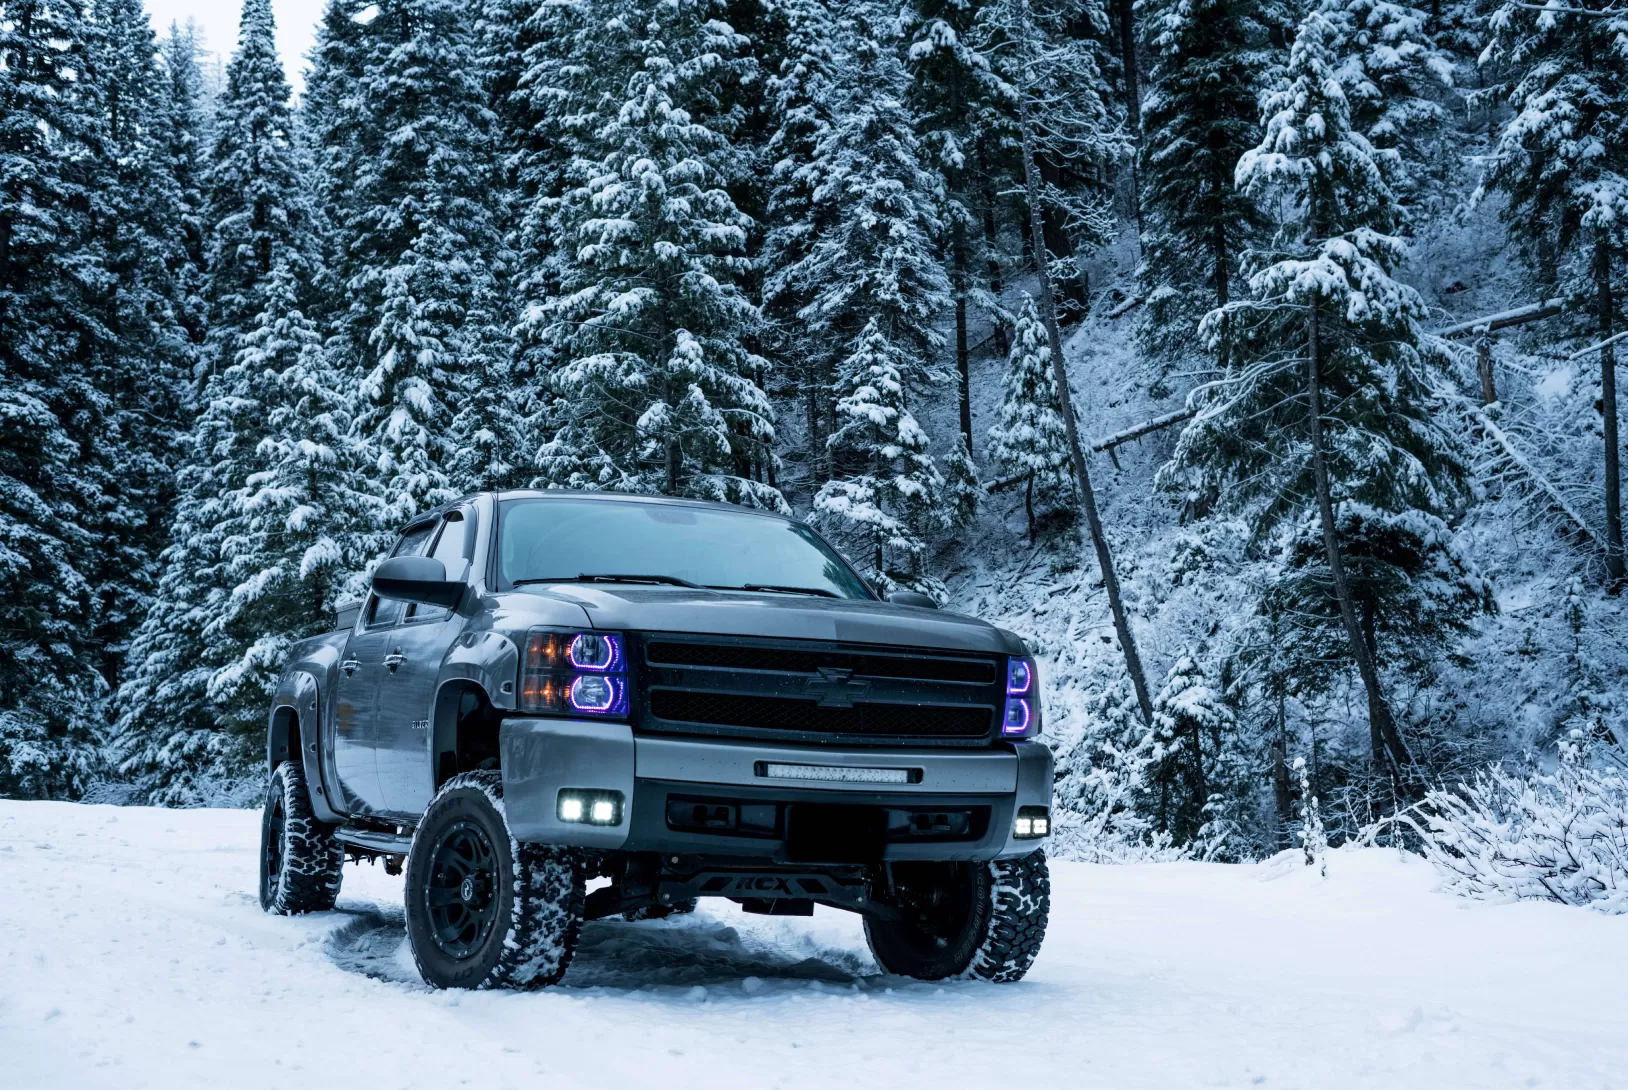 Chevrolet in the snowy forest